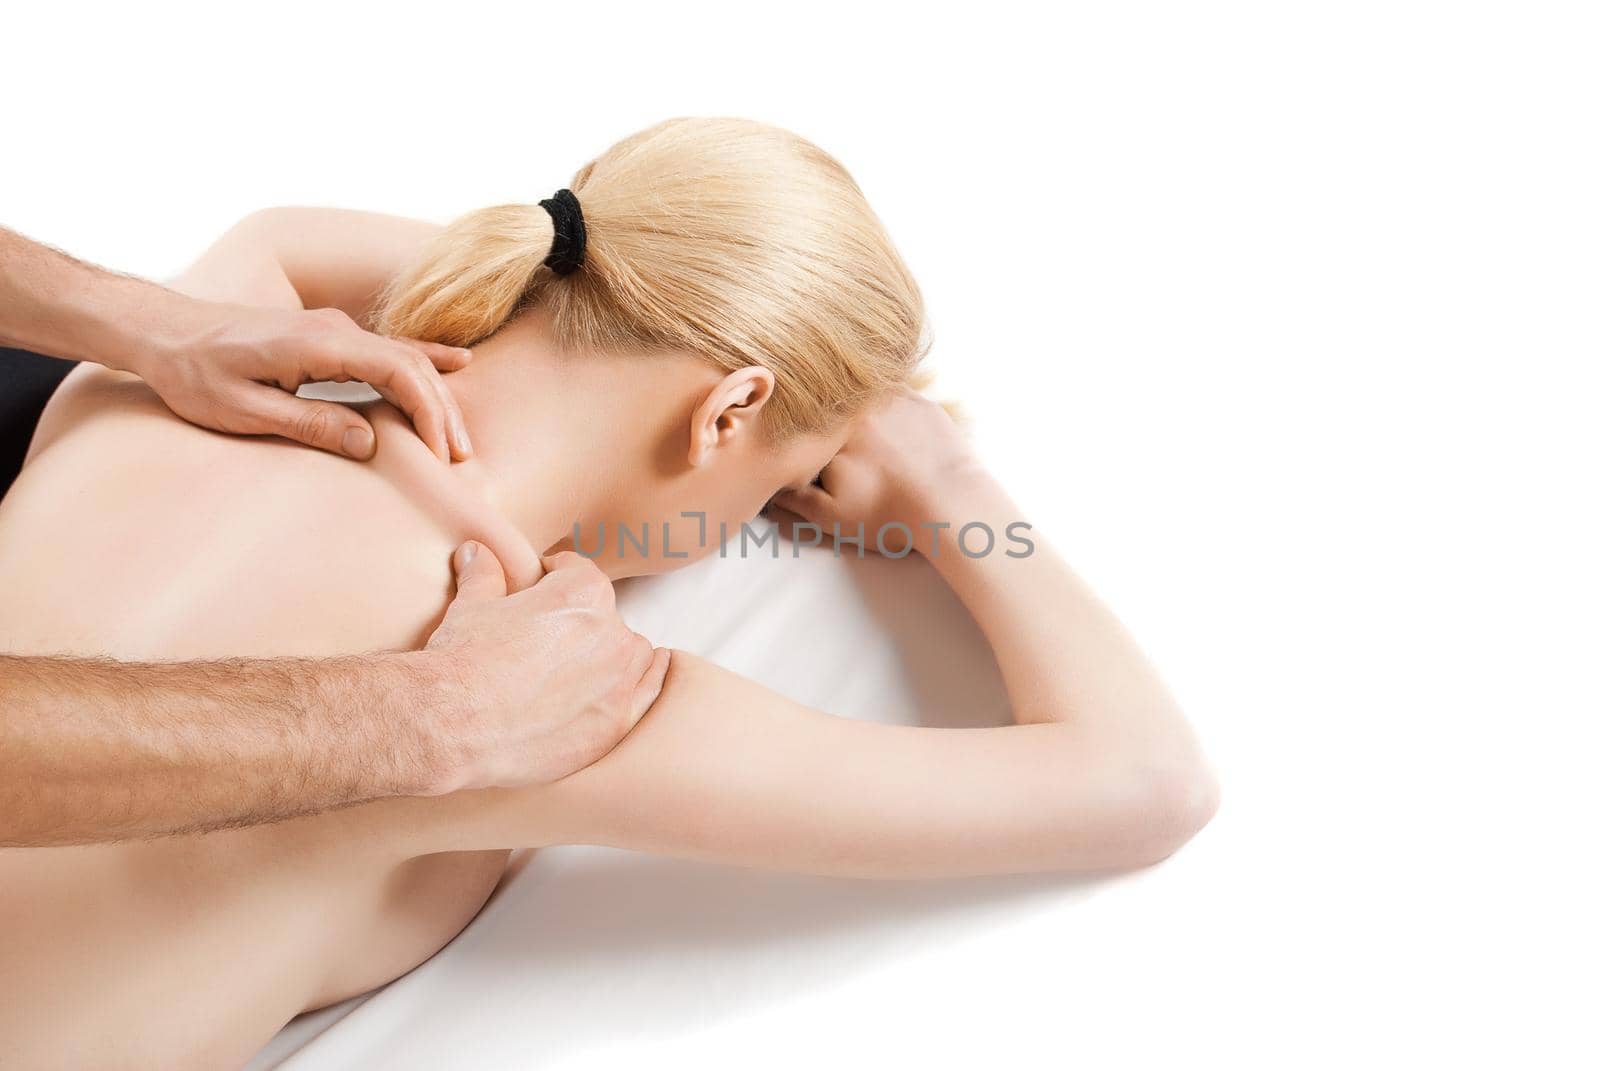 girl getting a massage - hands massaging her back - A pretty woman getting a shoulder and back massage